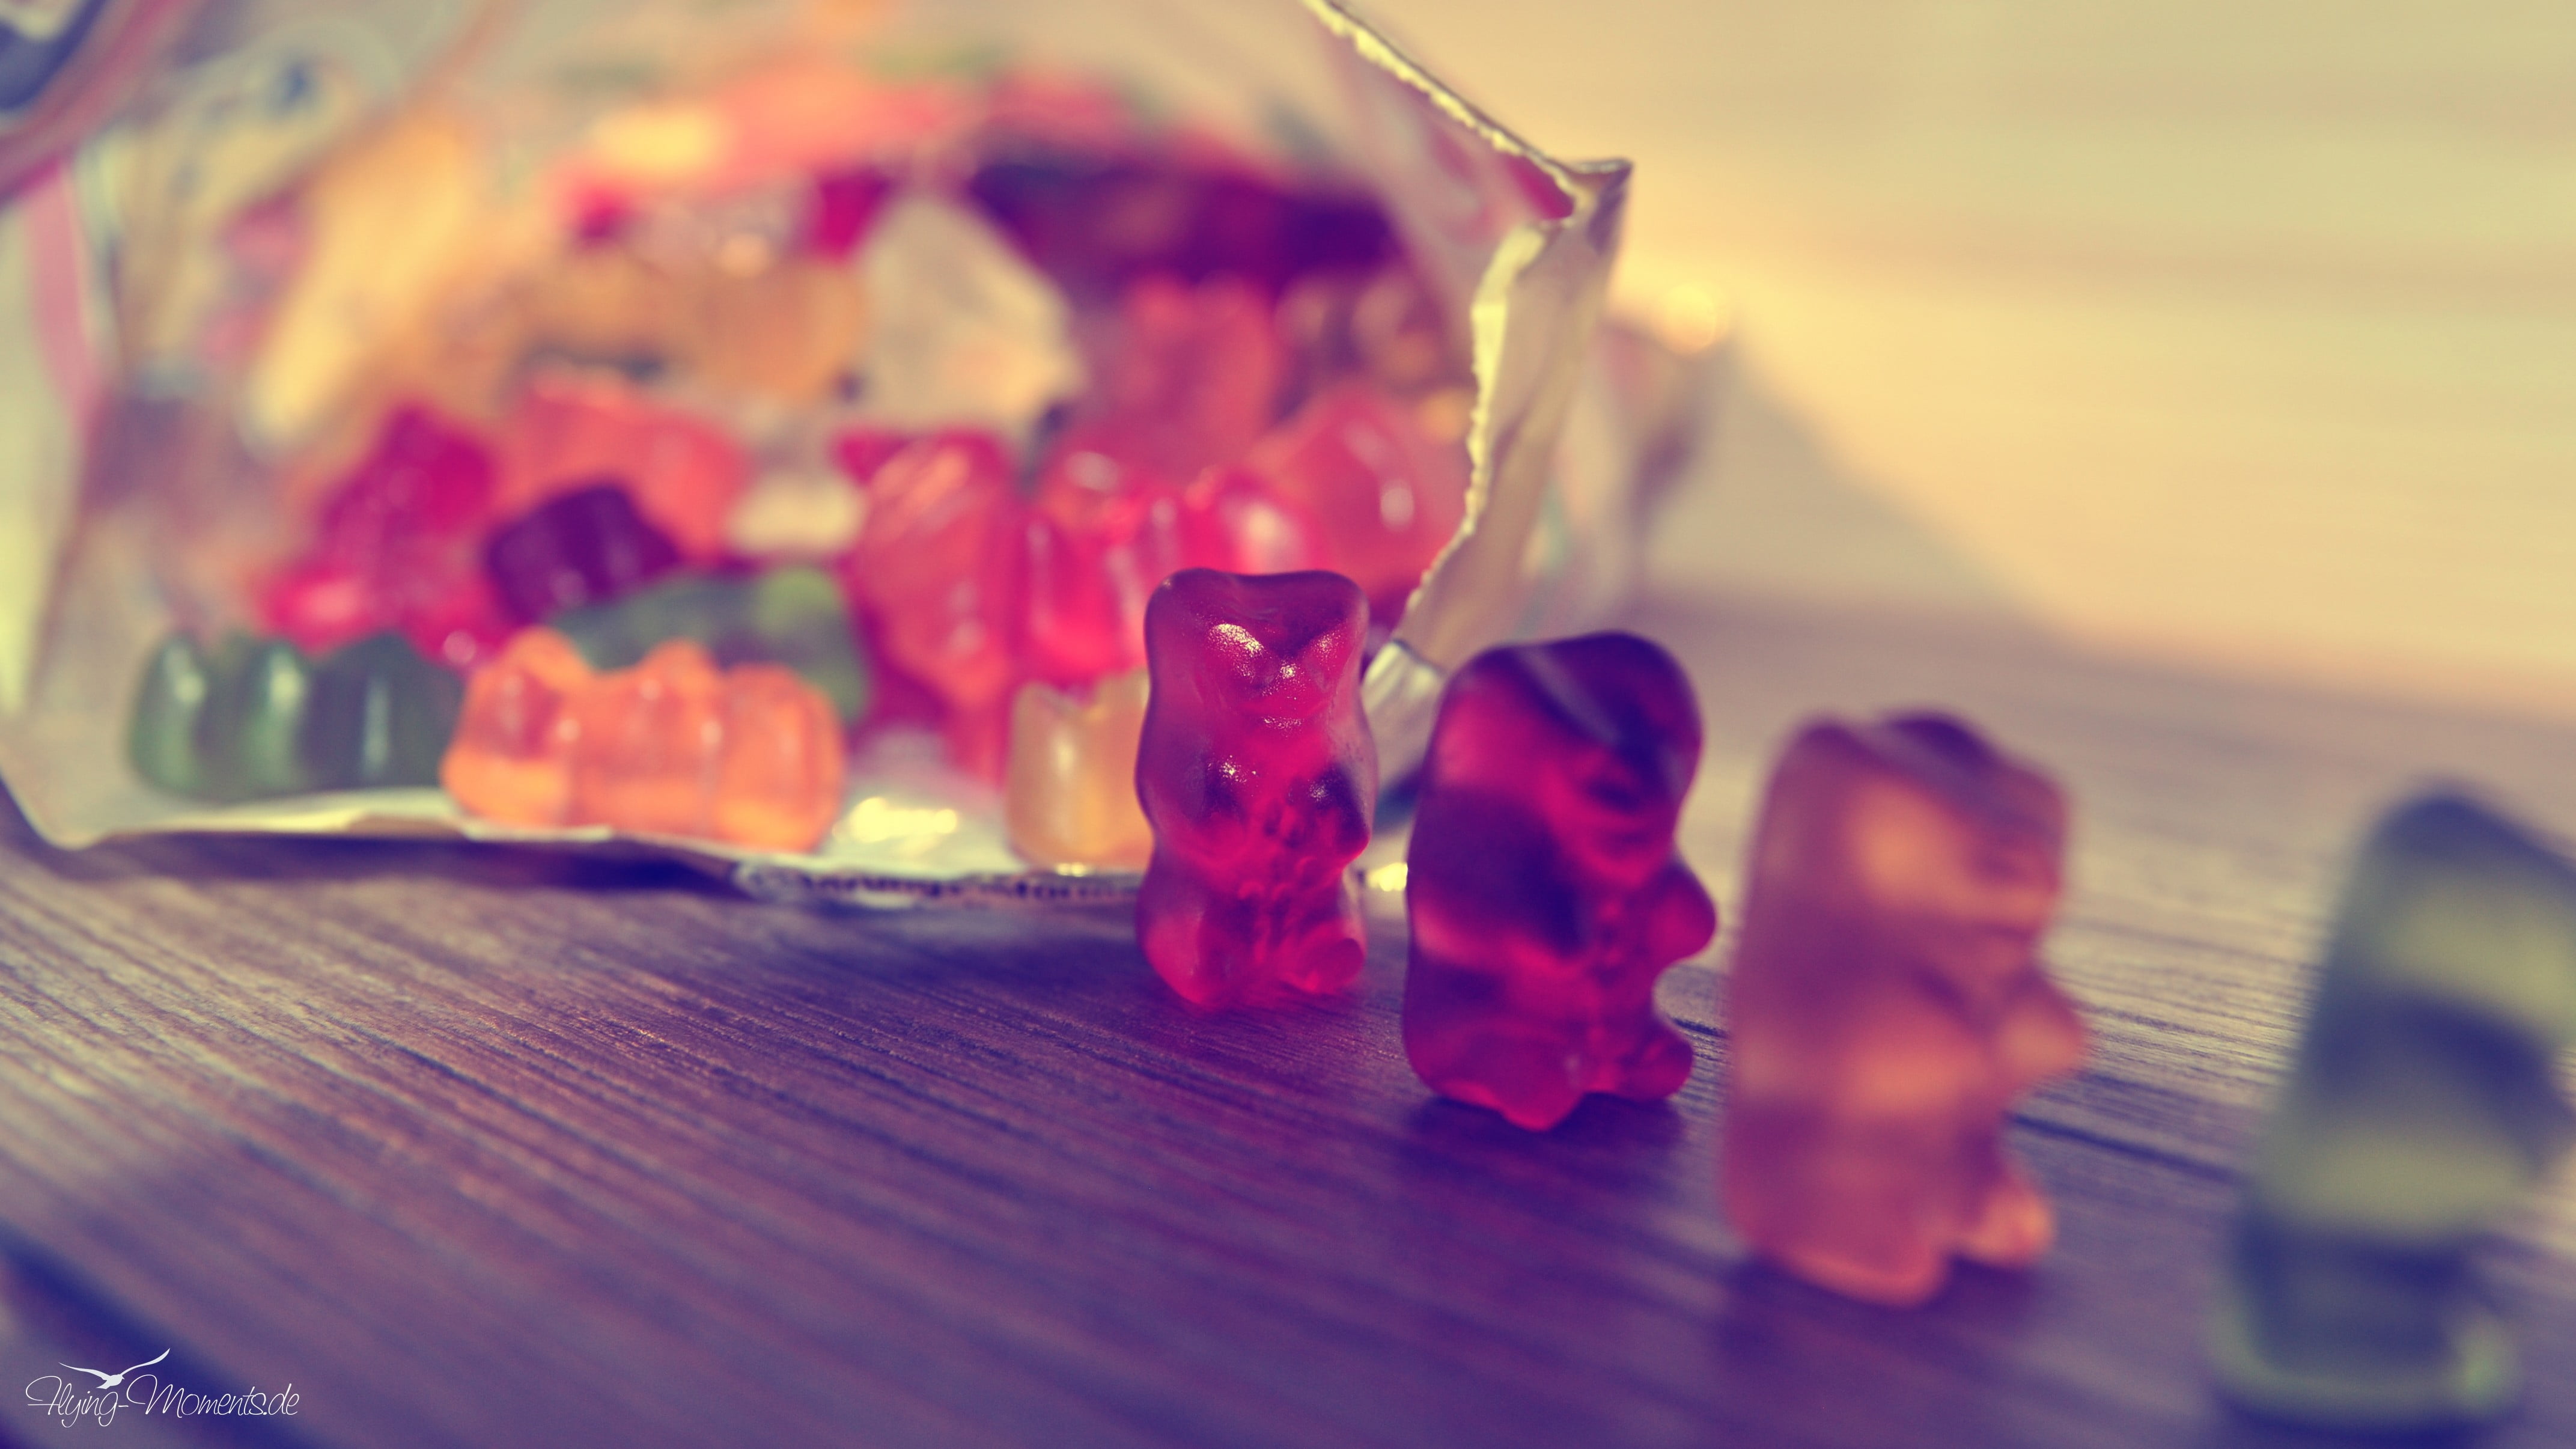 assorted gummy bears, marmalade, shape, package, table, close-up